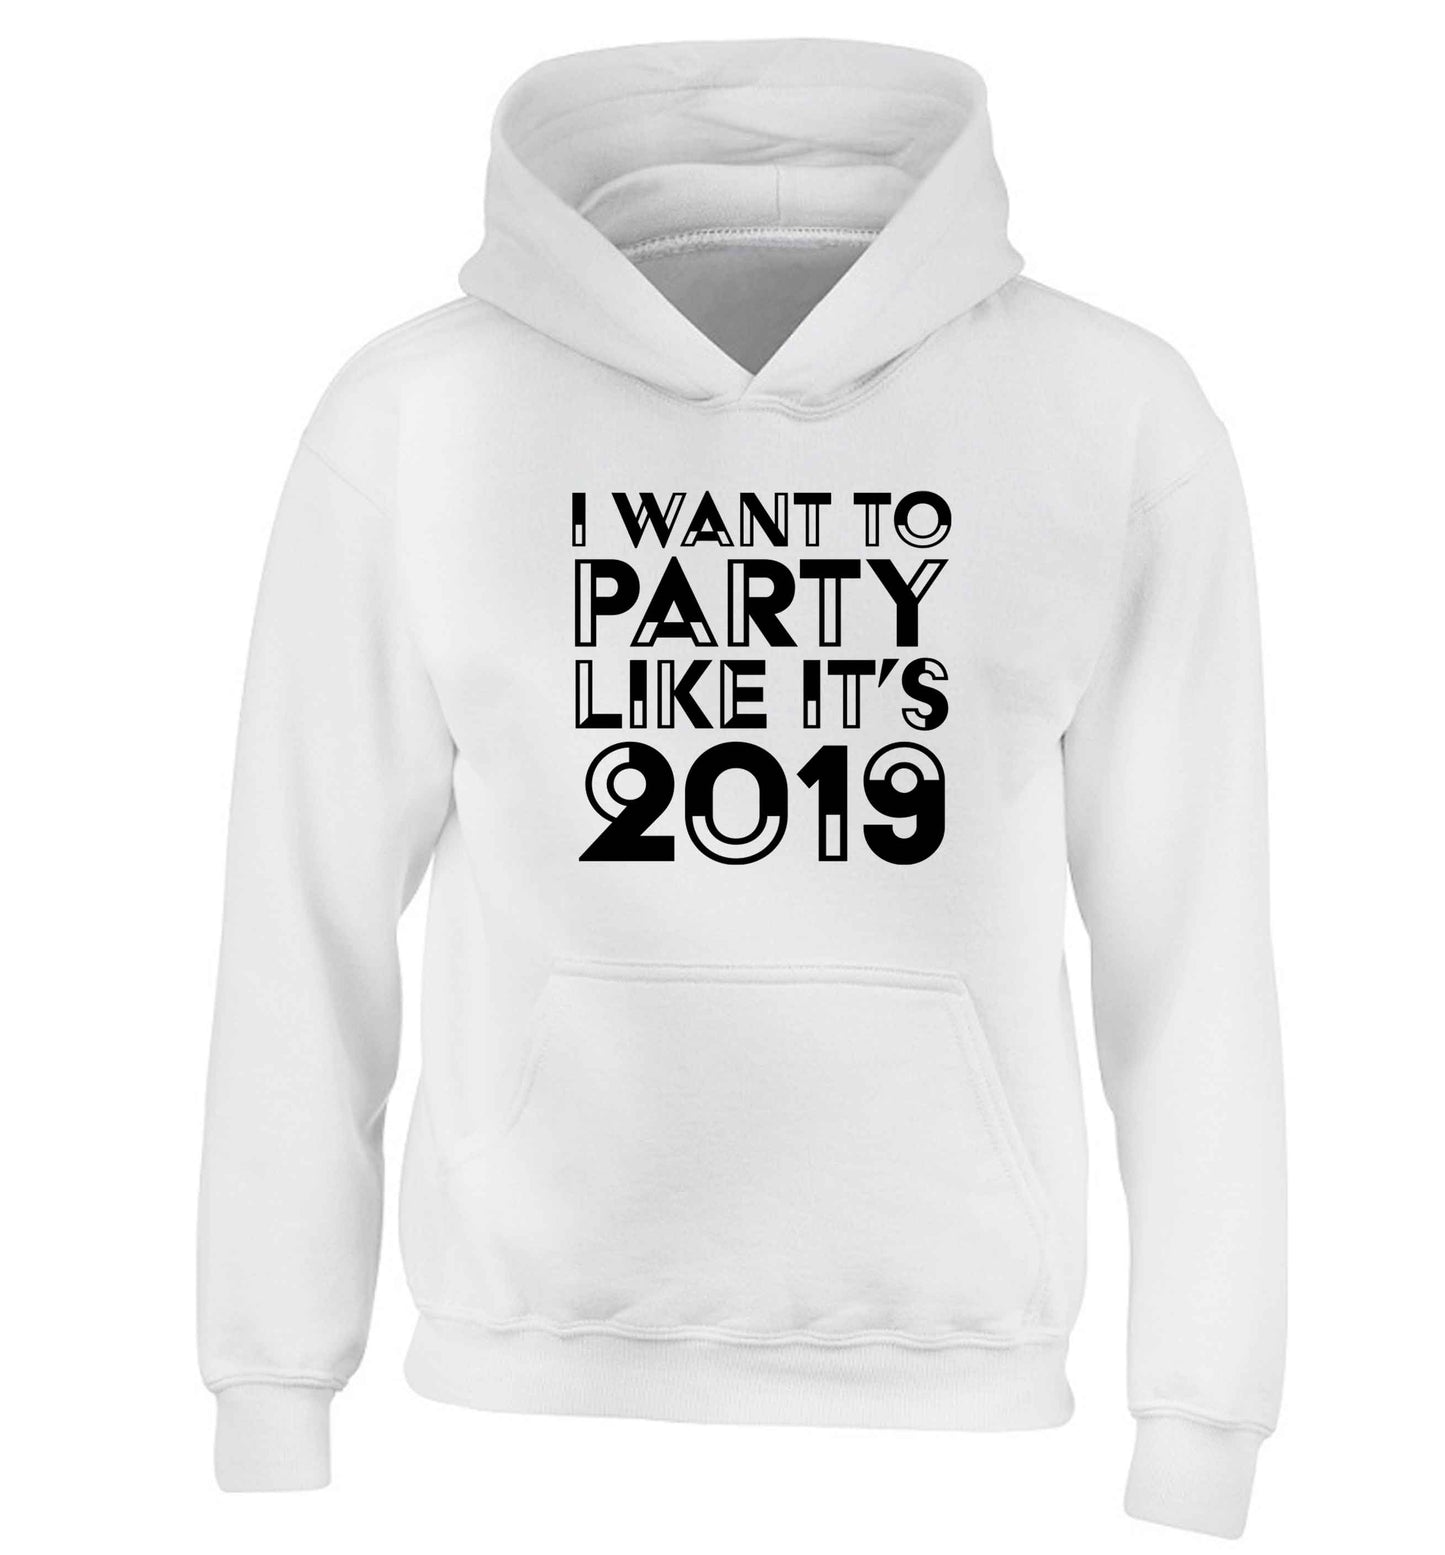 I want to party like it's 2019 children's white hoodie 12-13 Years